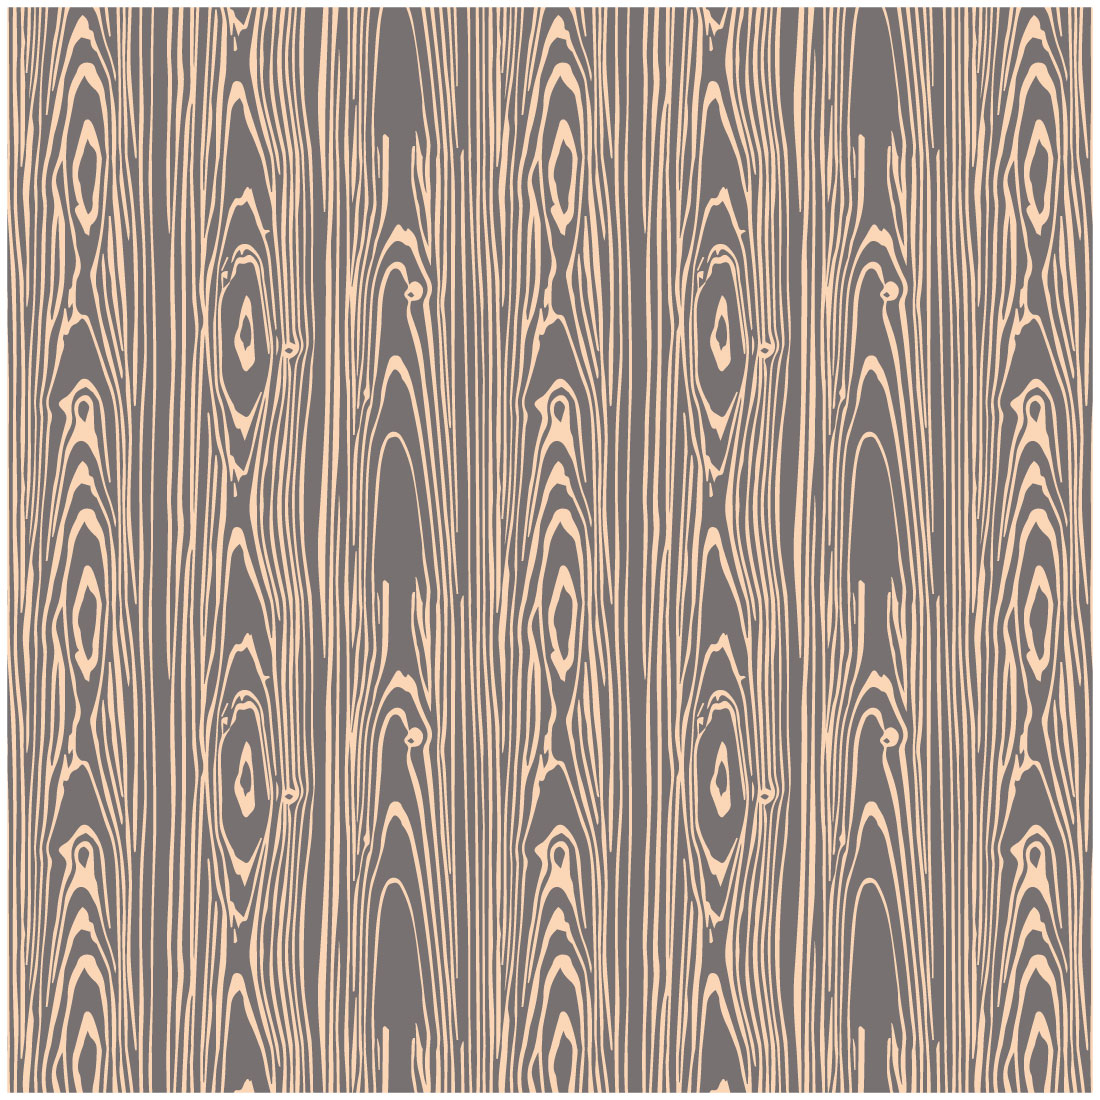 Woodgrain Seamless Vector Patterns cover image.